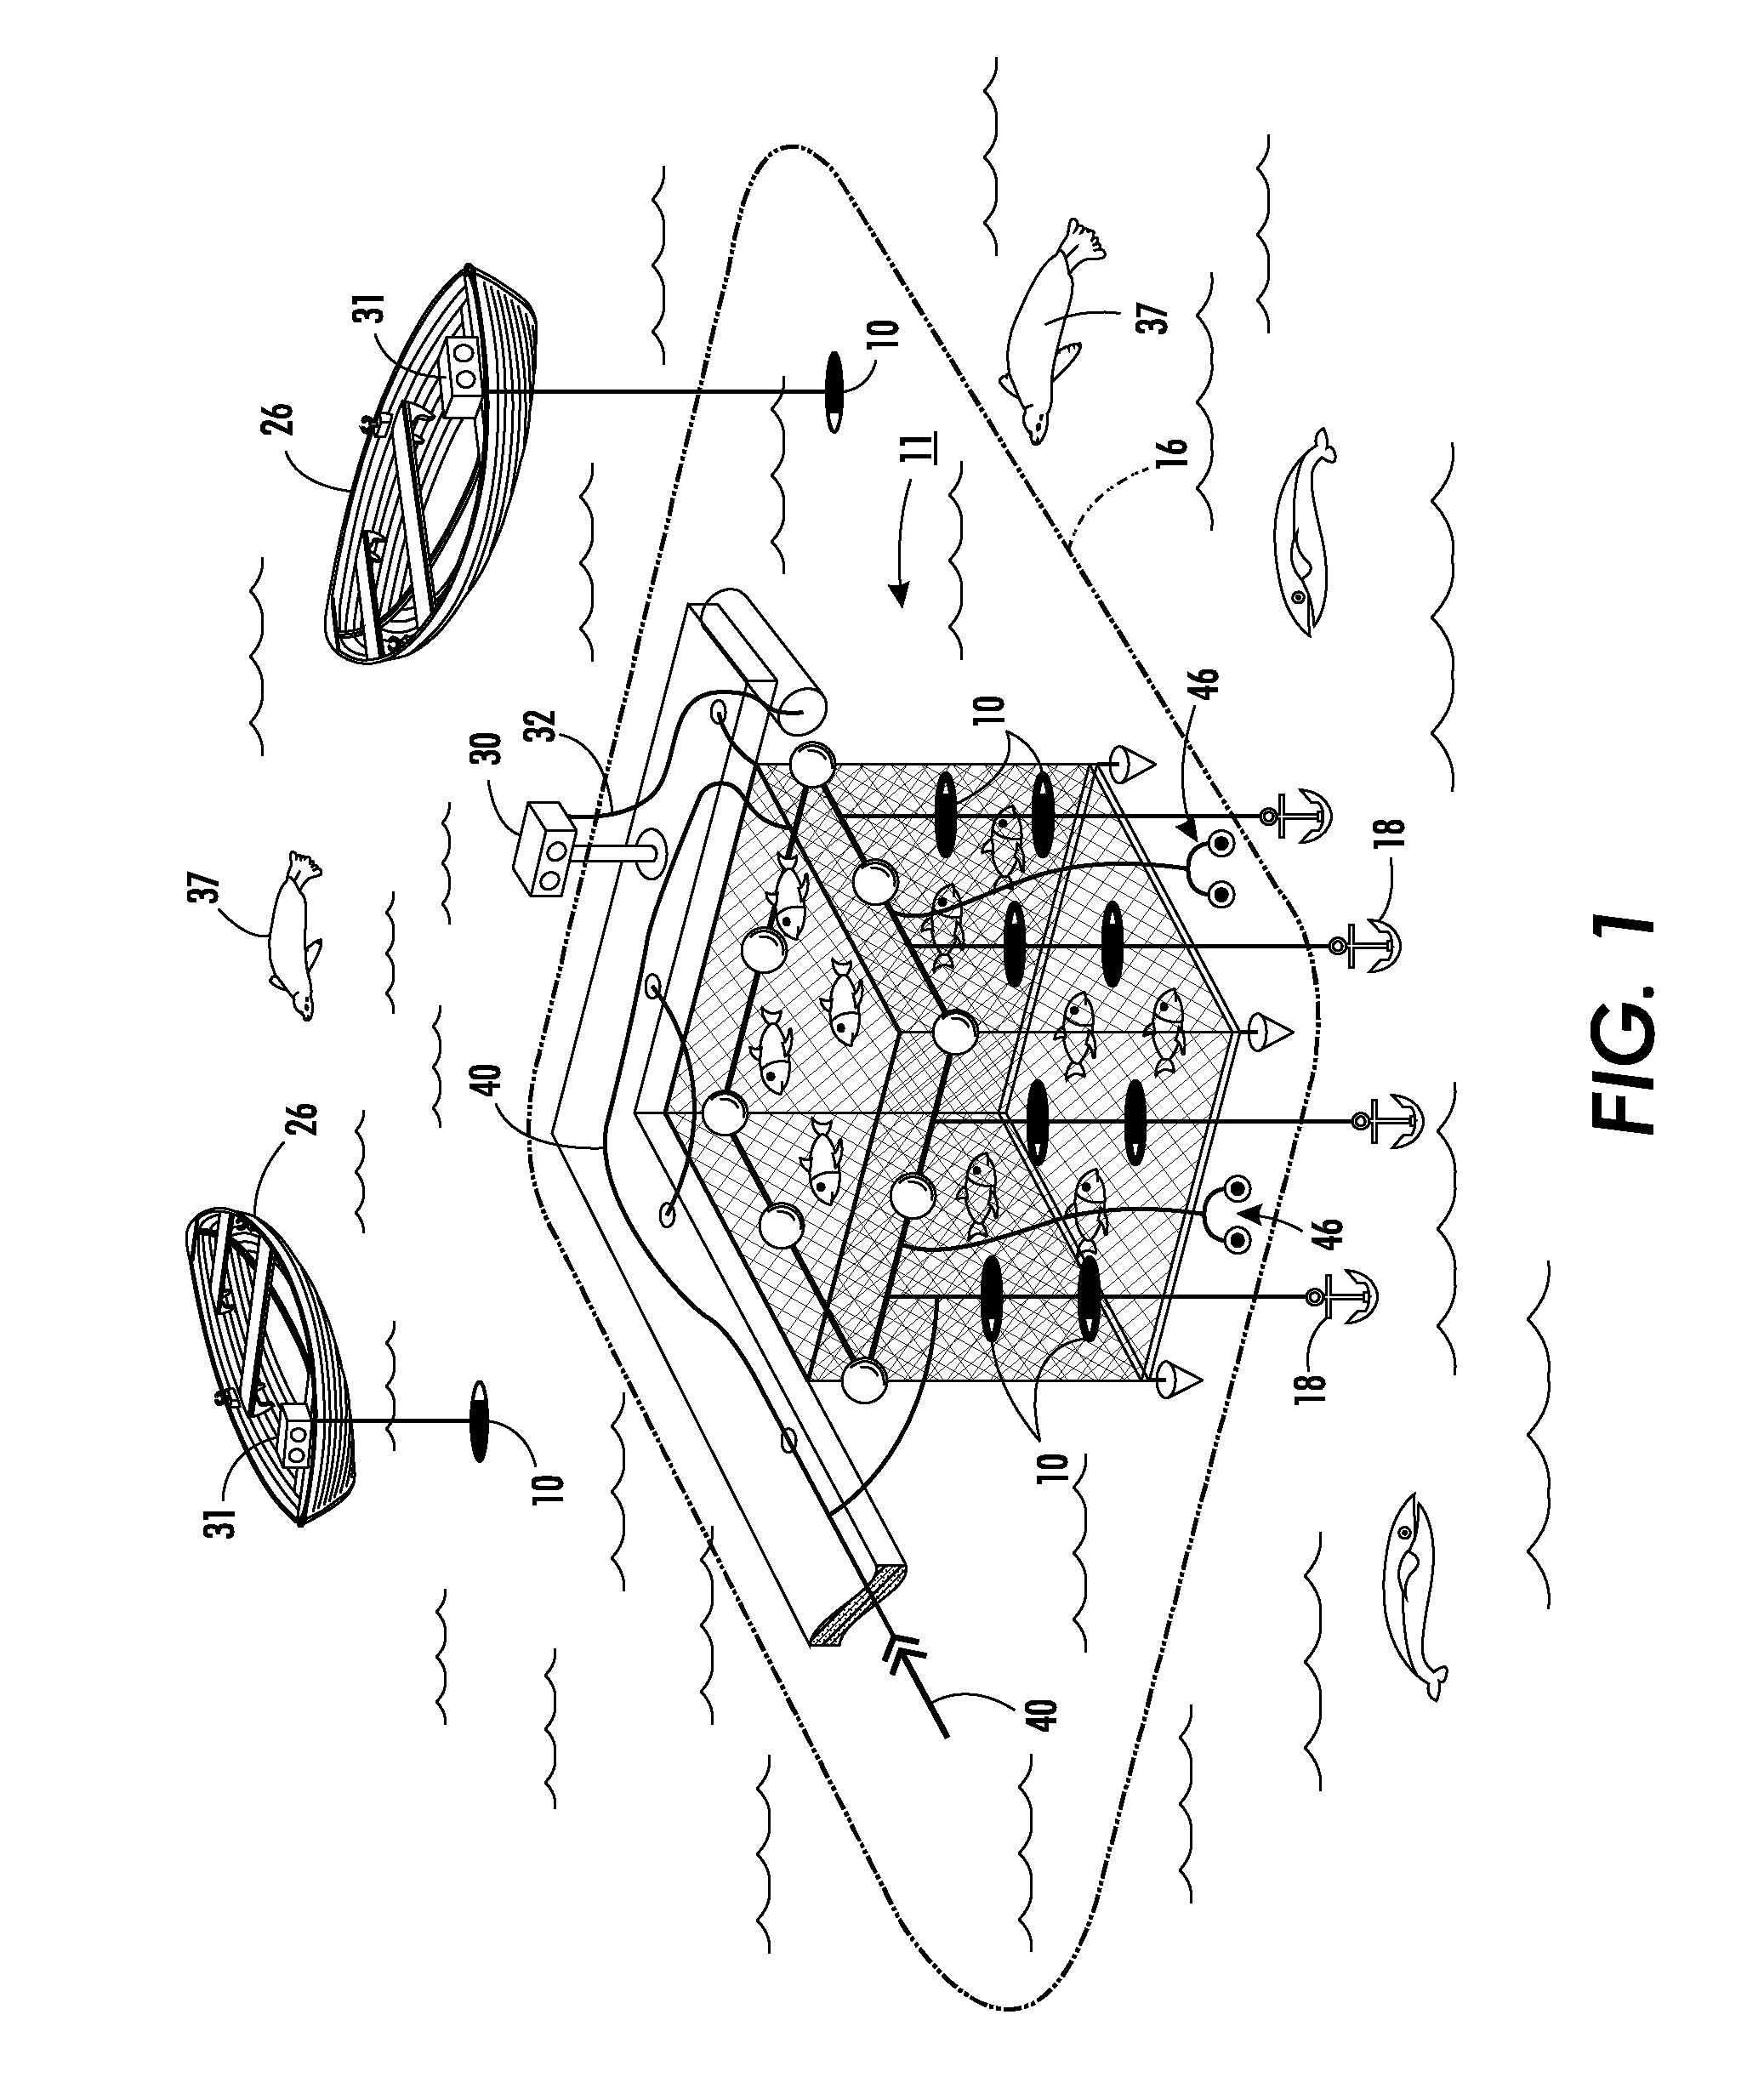 Low frequency acoustic deterrent system and method